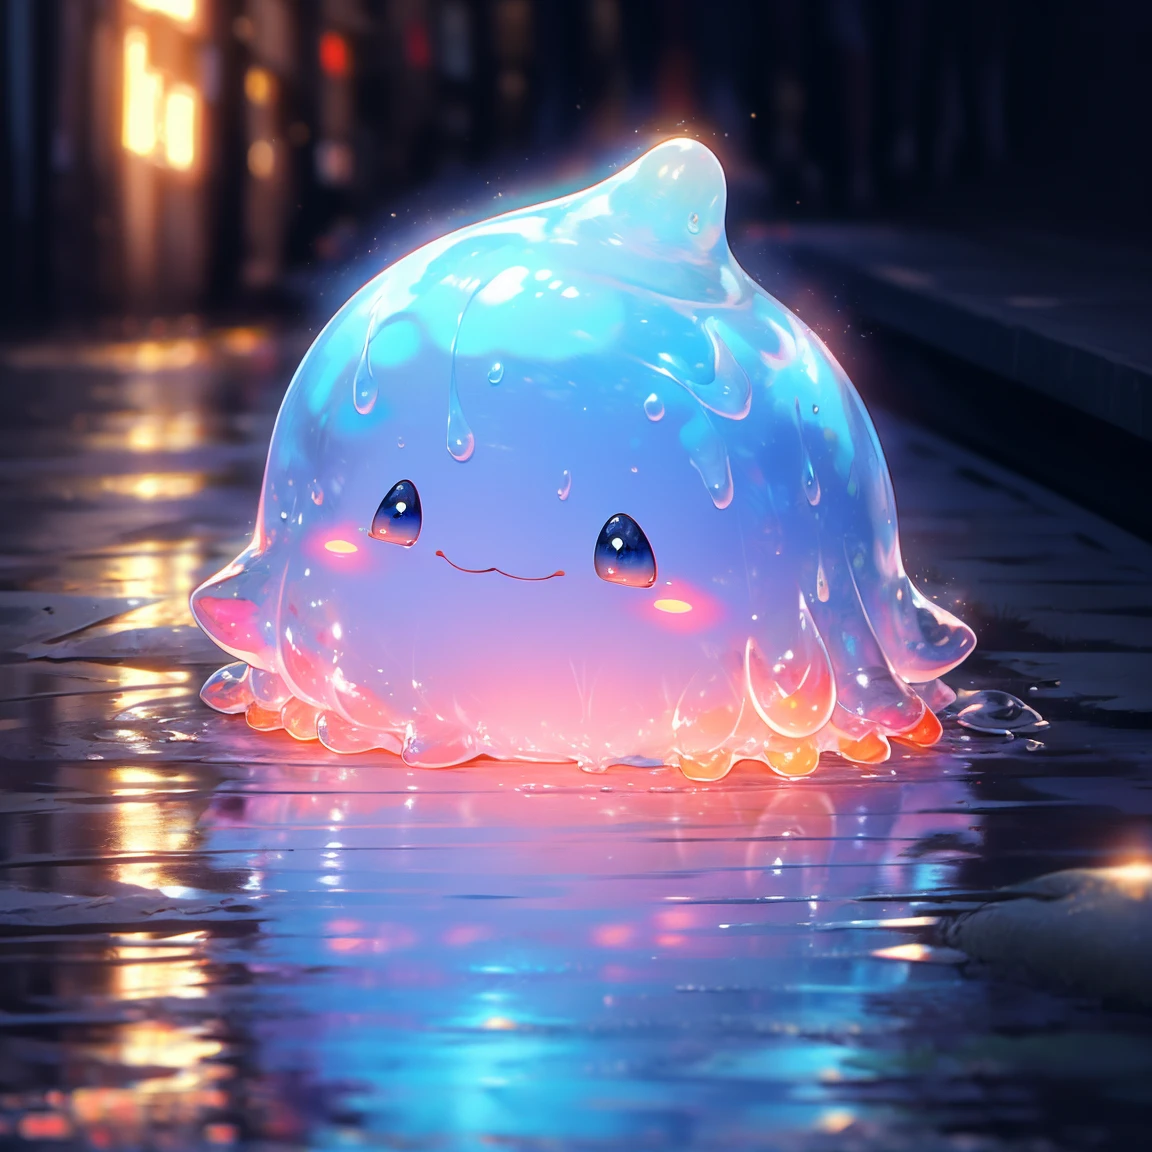 A shiny blue and red slime, hiking cute face,vibrant and translucent texture, slime stretching and squishing, detailed, mesmerizing patterns and swirls, sparkling and reflecting light, satisfying to touch and play with, high-res masterpiece, vivid colors, illuminated with soft studio lighting.